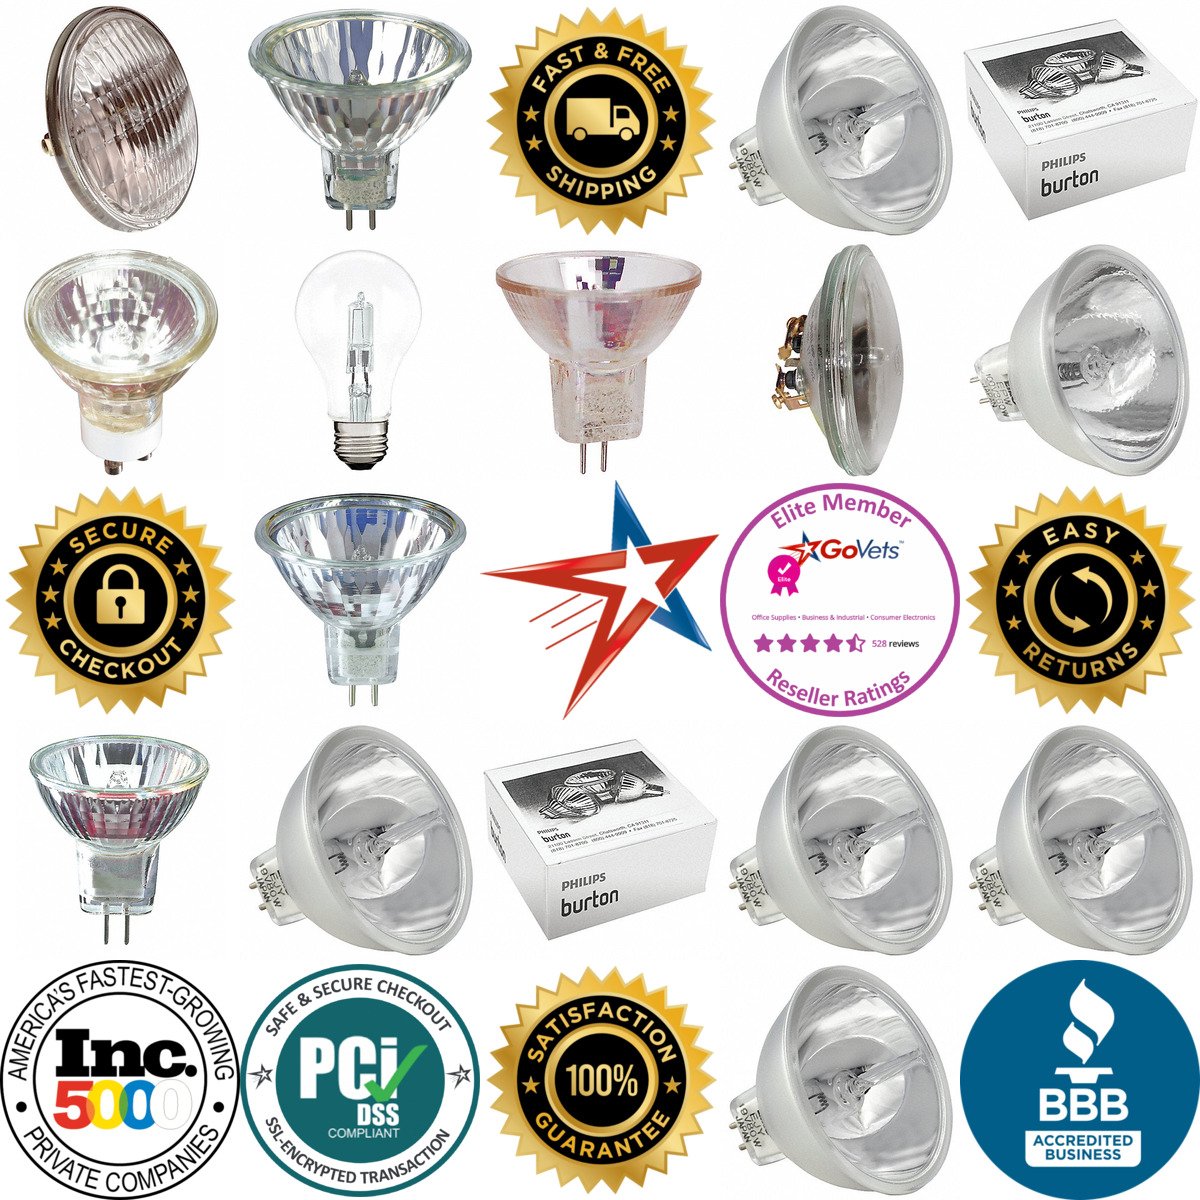 A selection of Halogen Lamps and Bulbs products on GoVets